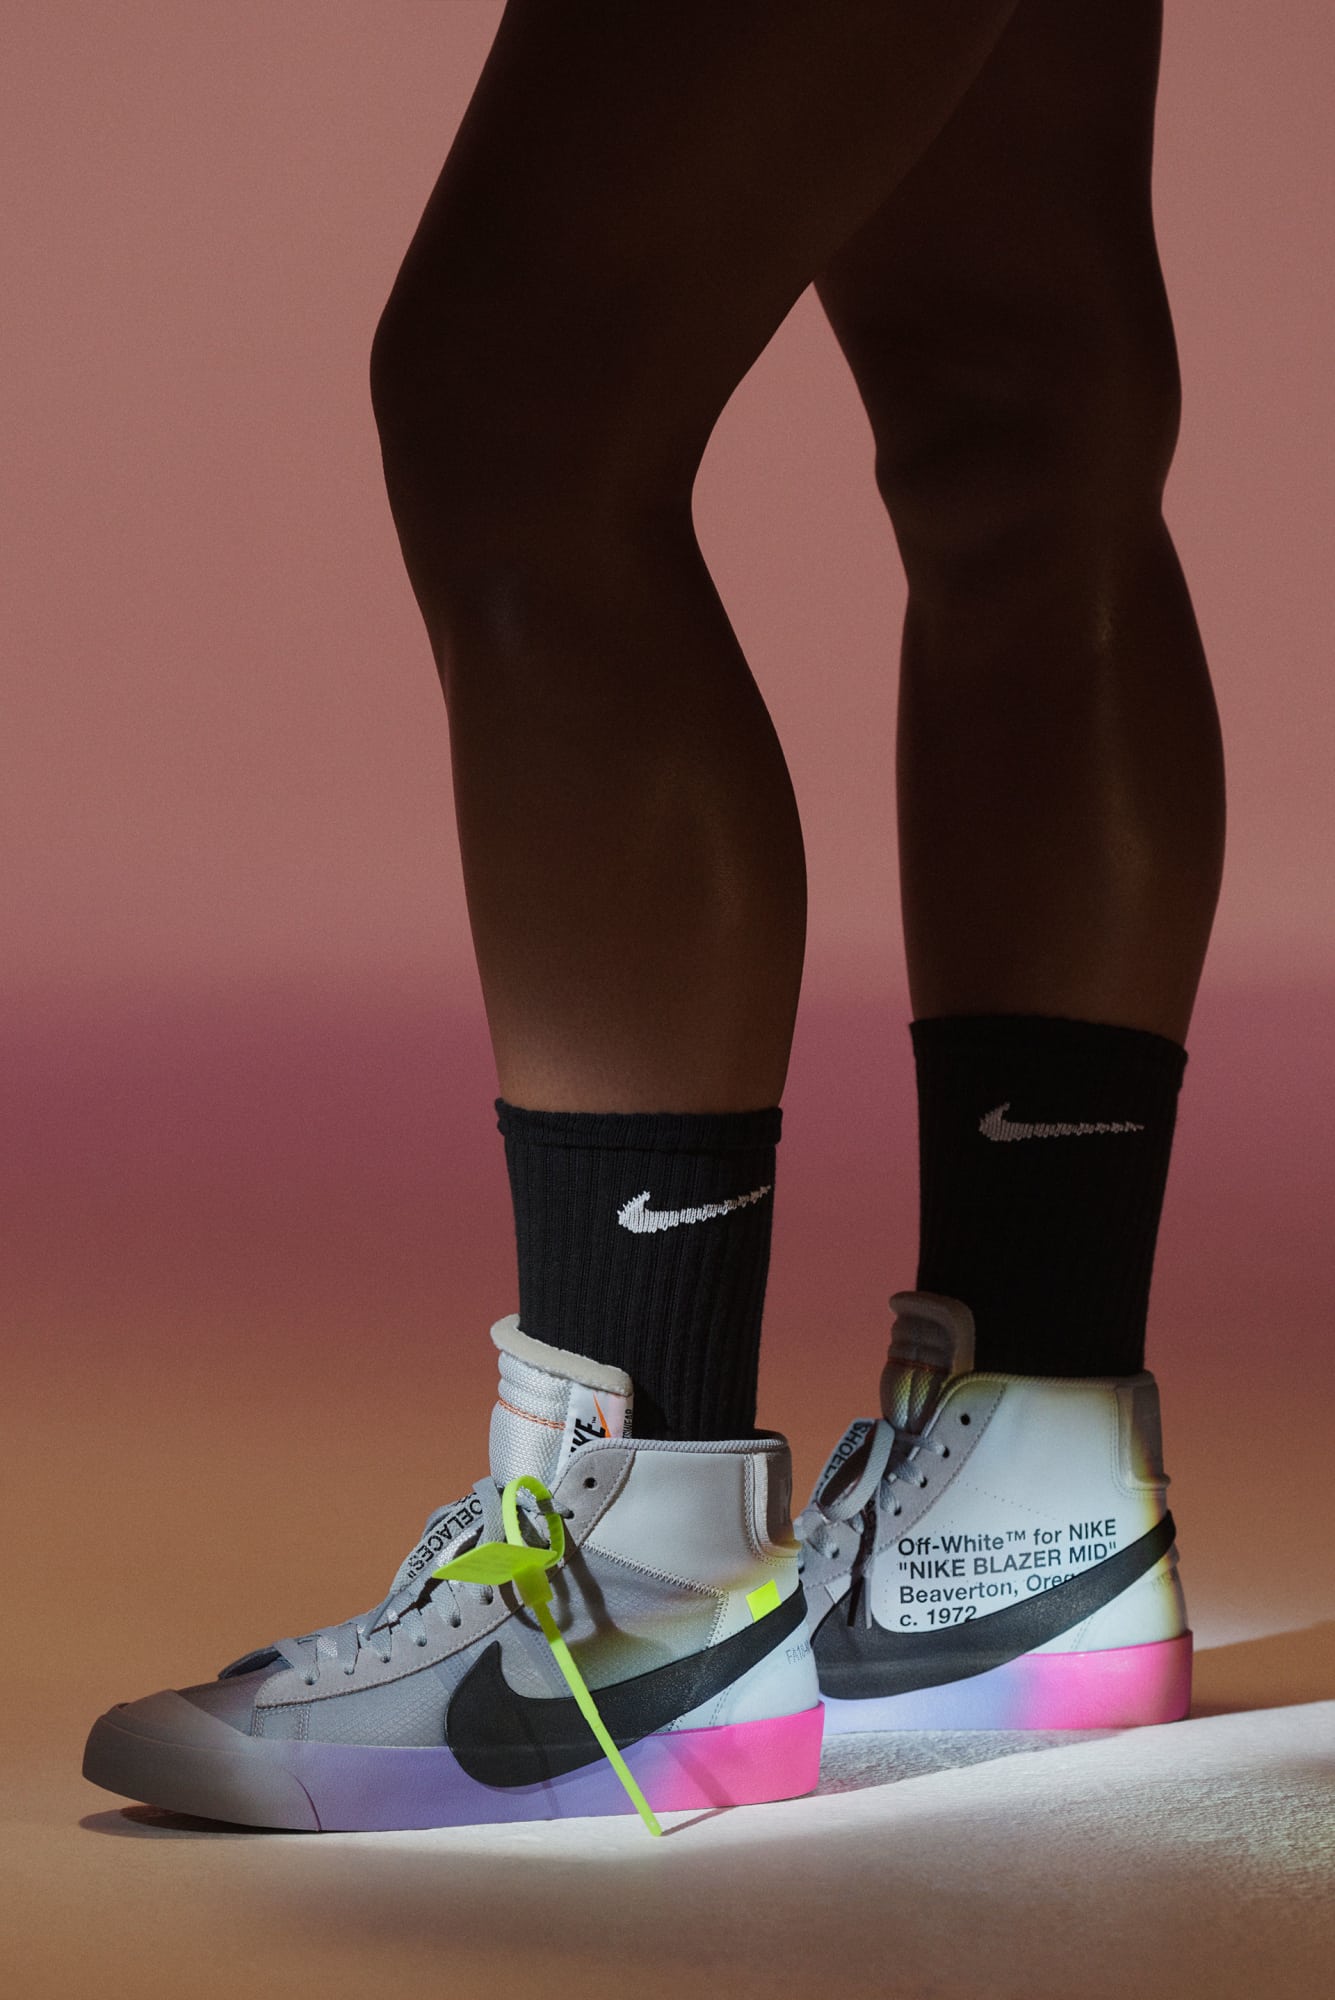 Nike x Virgil Abloh Queen Collection